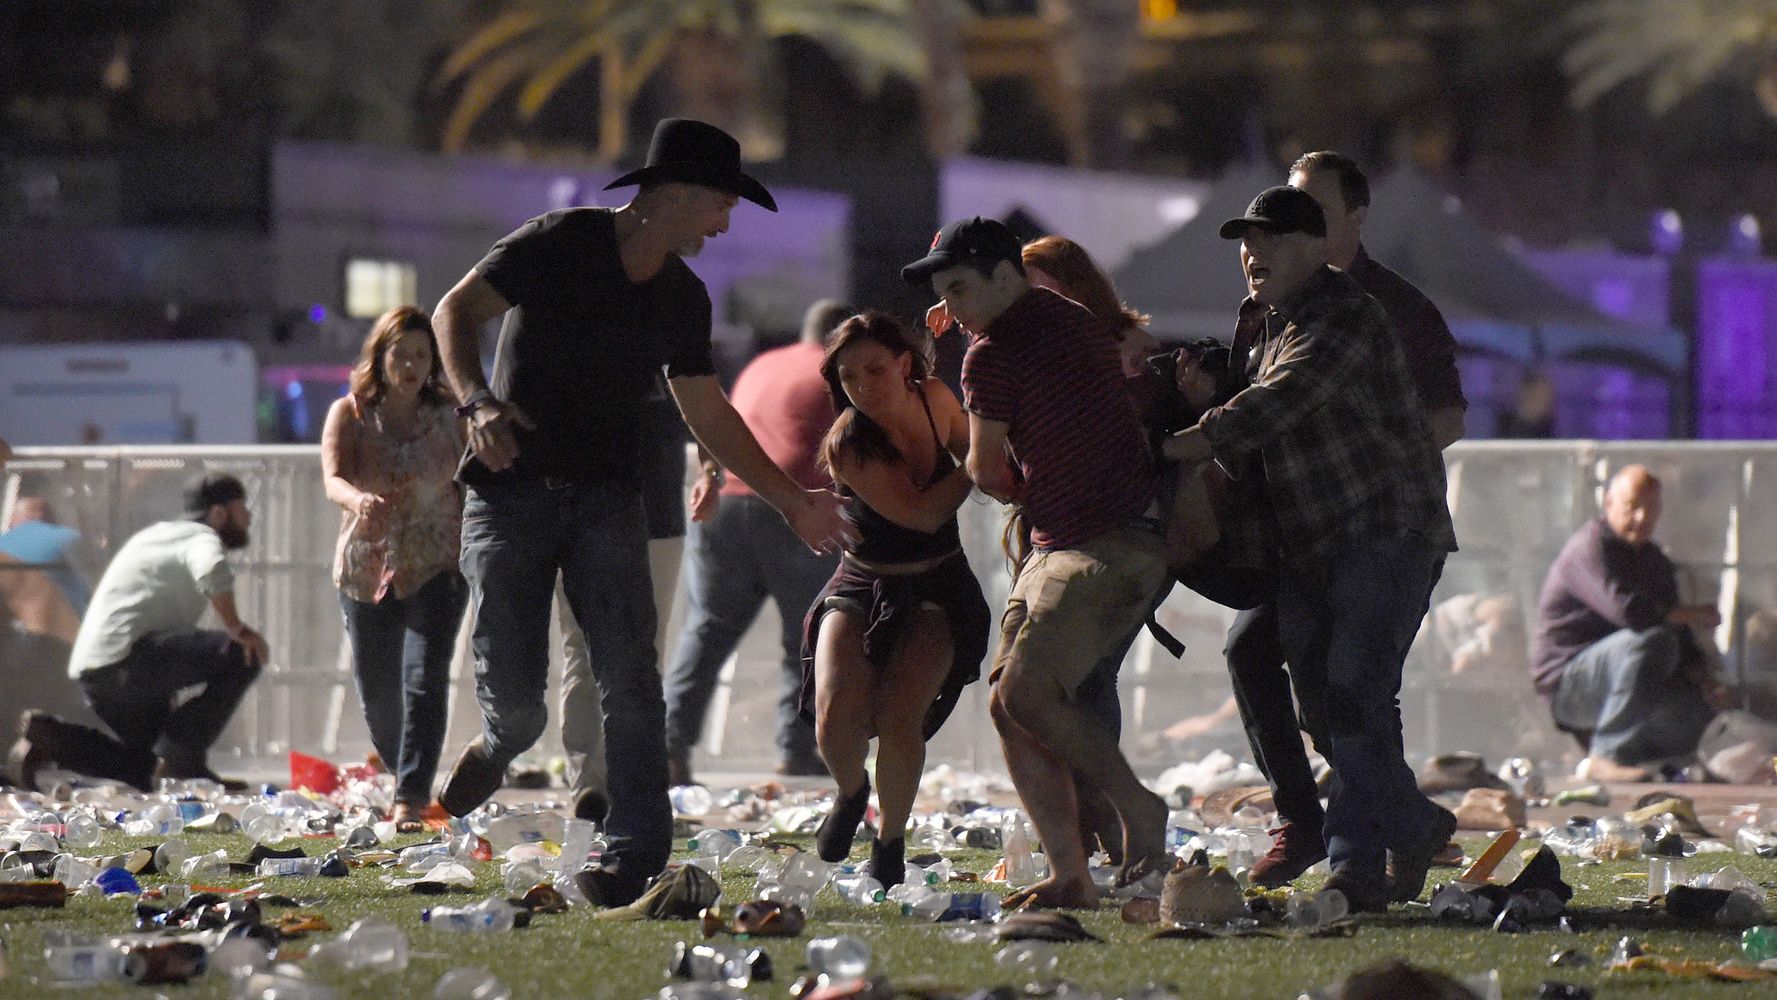 Over 50 Dead, Hundreds Wounded In Shooting At Las Vegas Country Music Festival | HuffPost Latest News